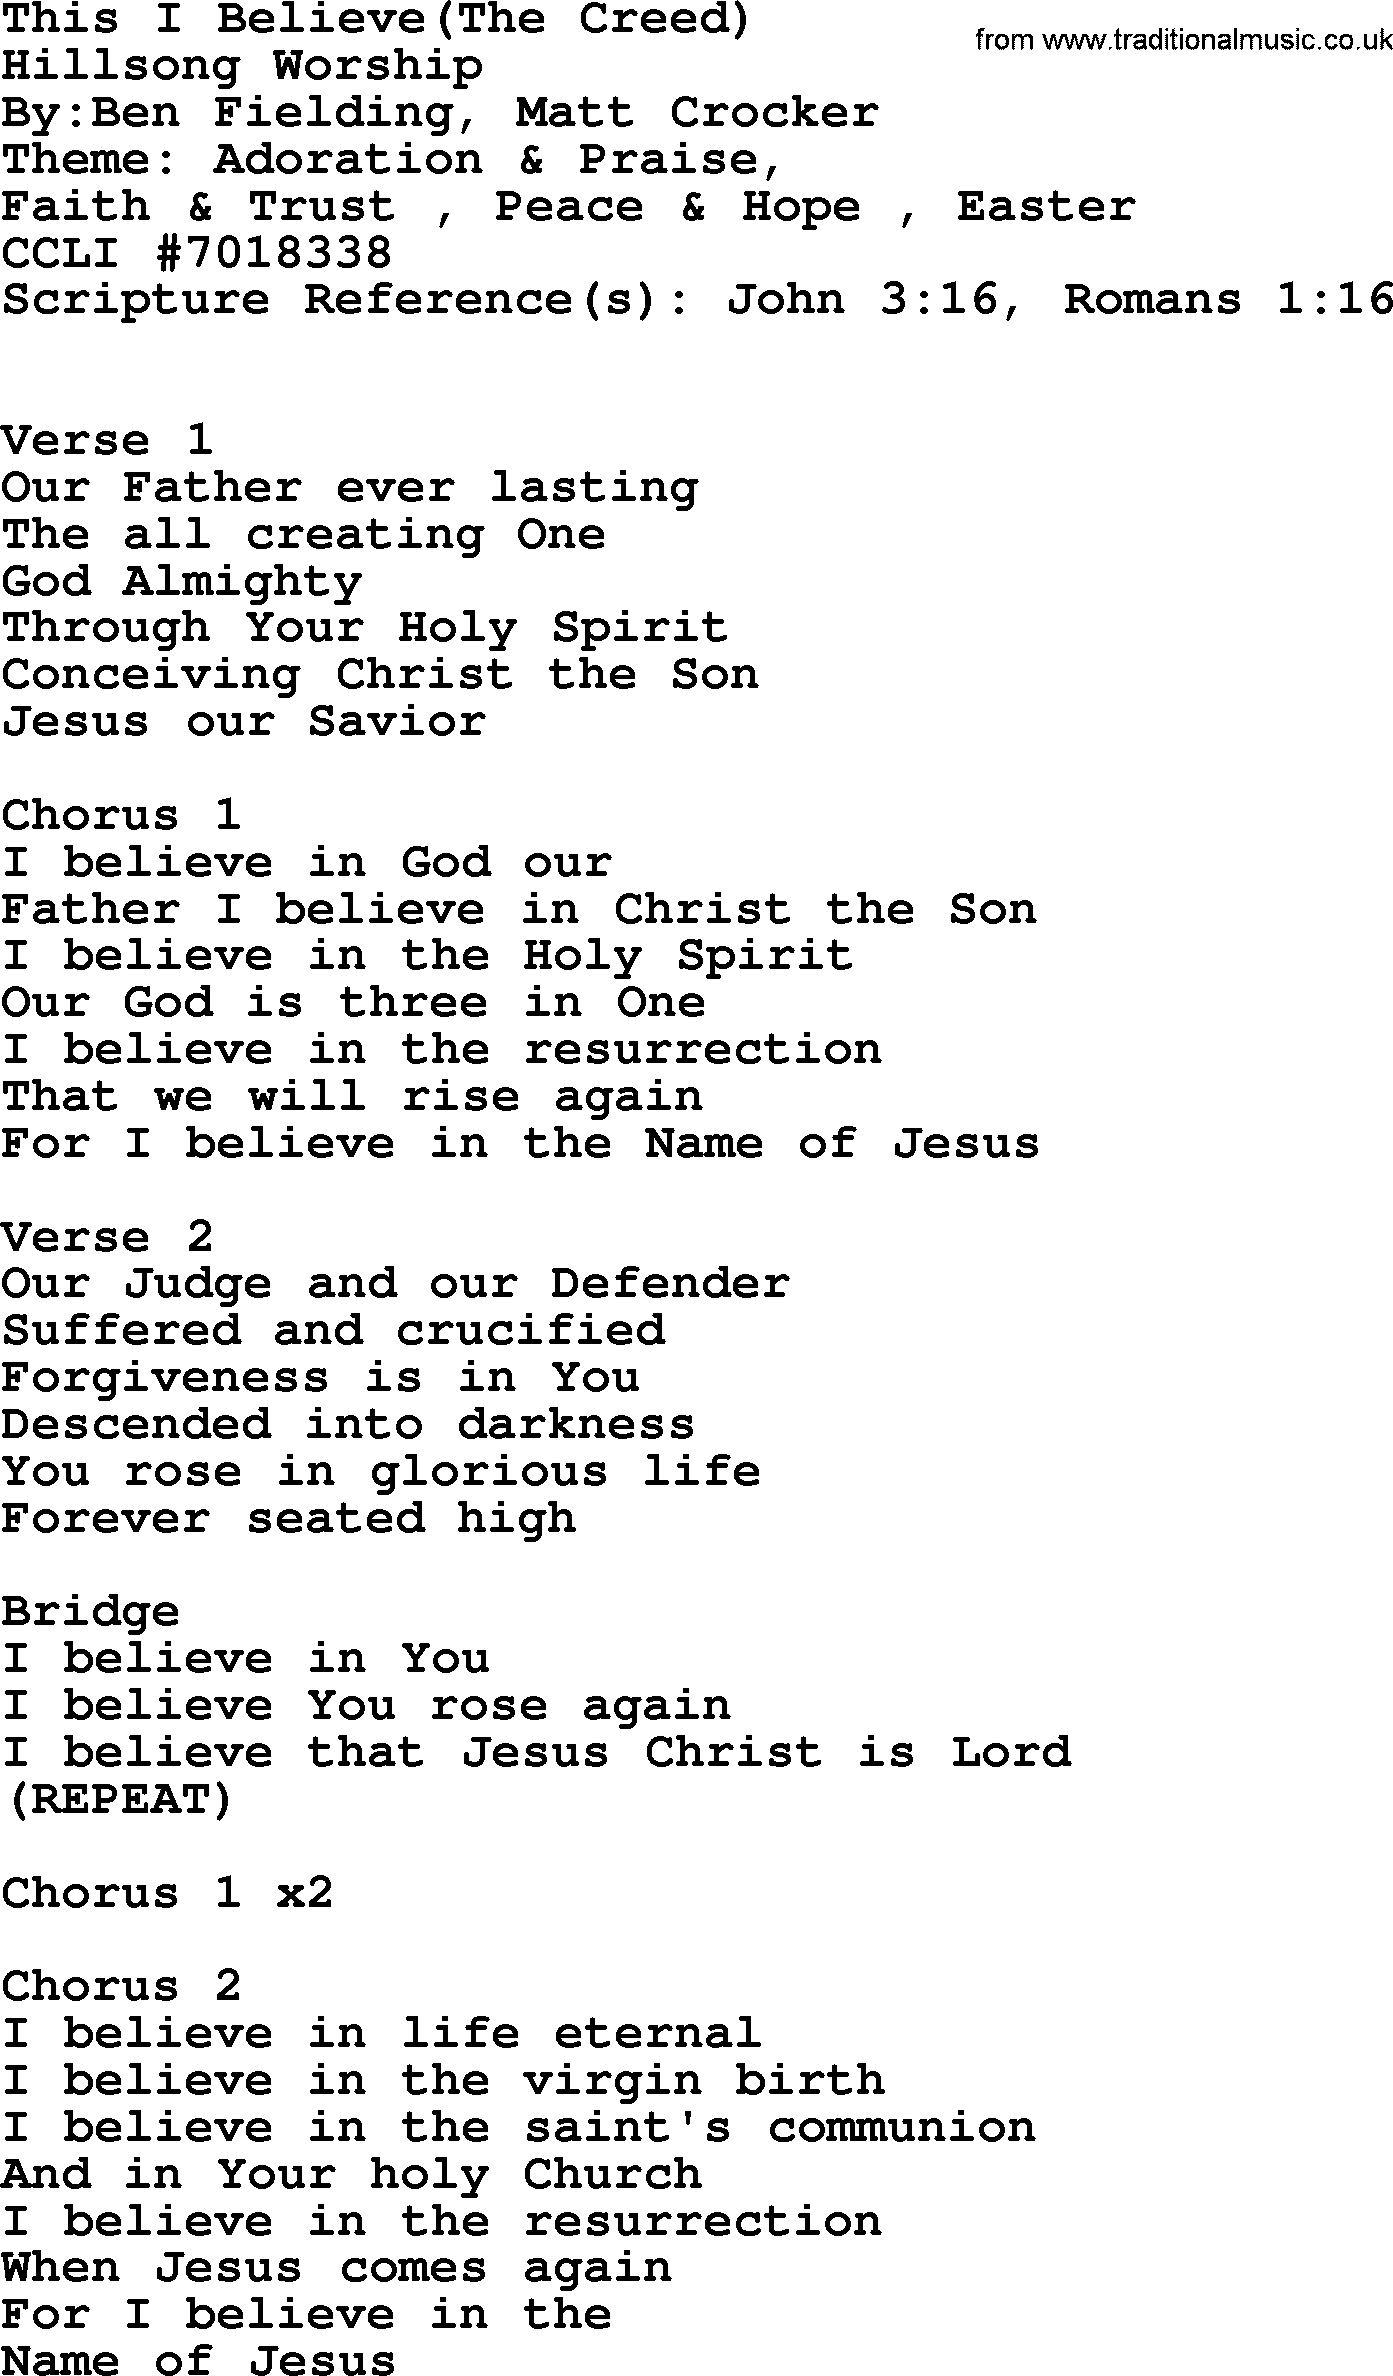 A collection of 500+ most sung Christian church hymns and songs, title: This I Believe(The Creed)~, lyrics, PPTX and PDF